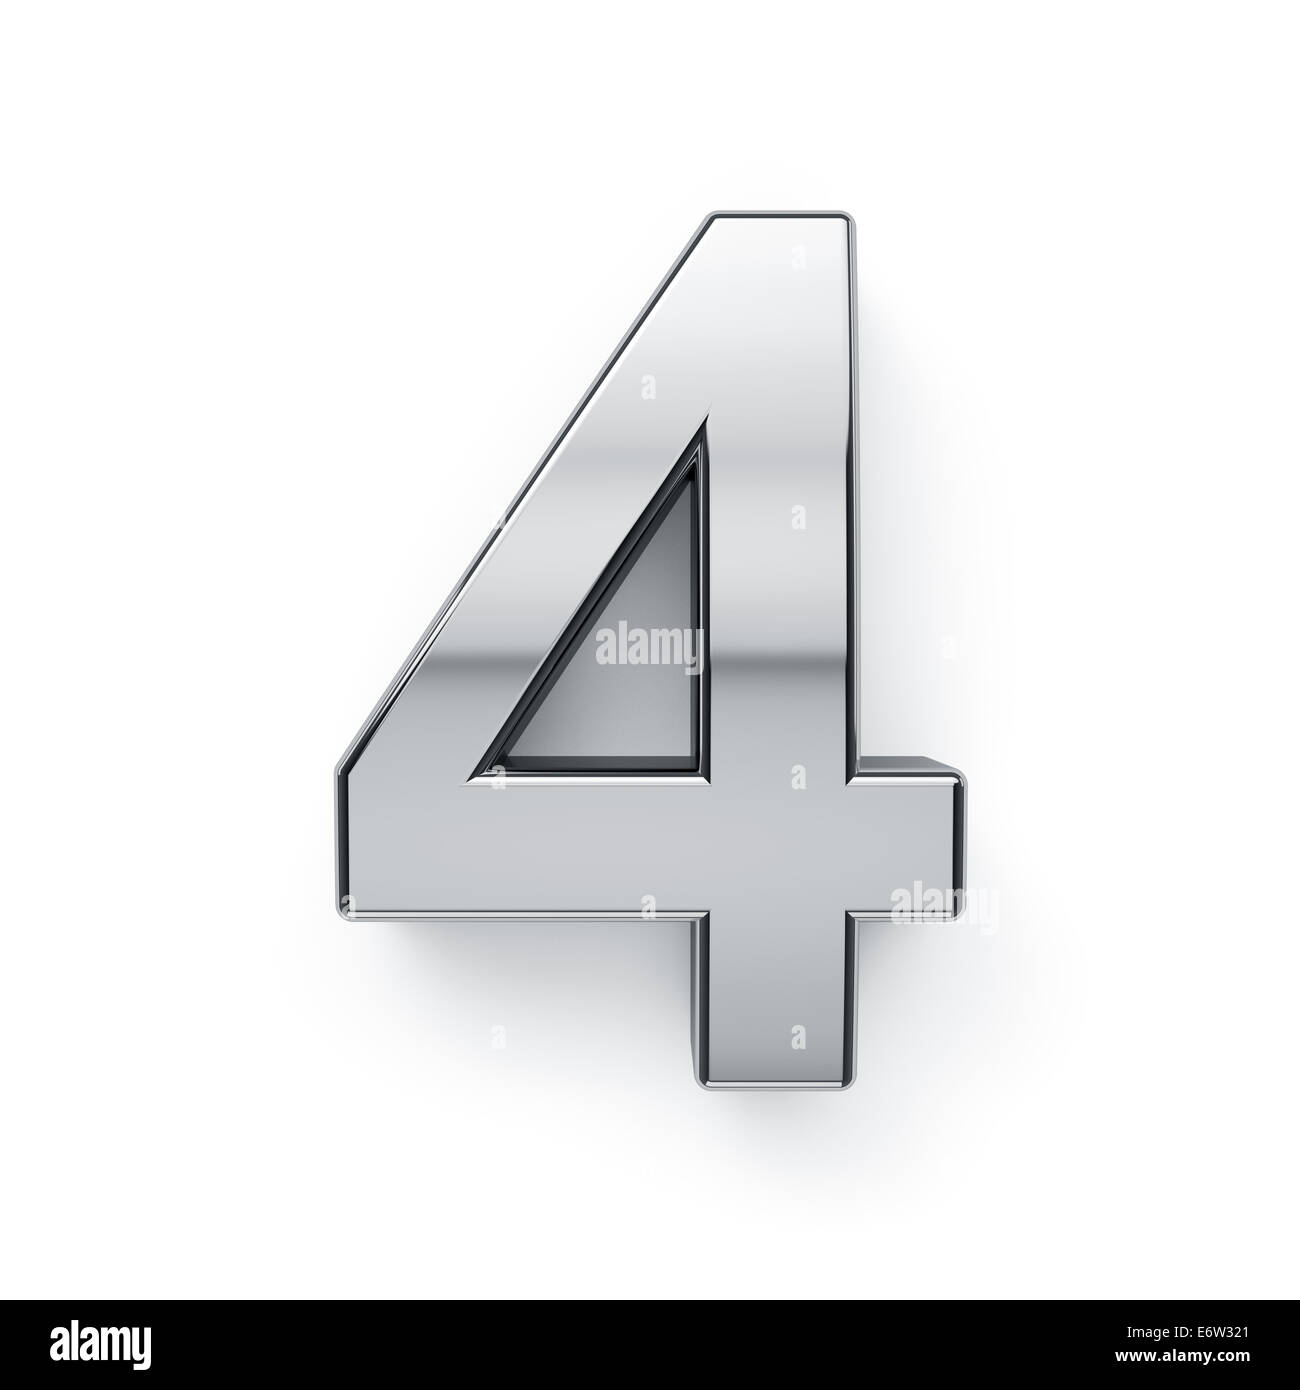 3d render of metallic digit four symbol - 4. Isolated on white background Stock Photo